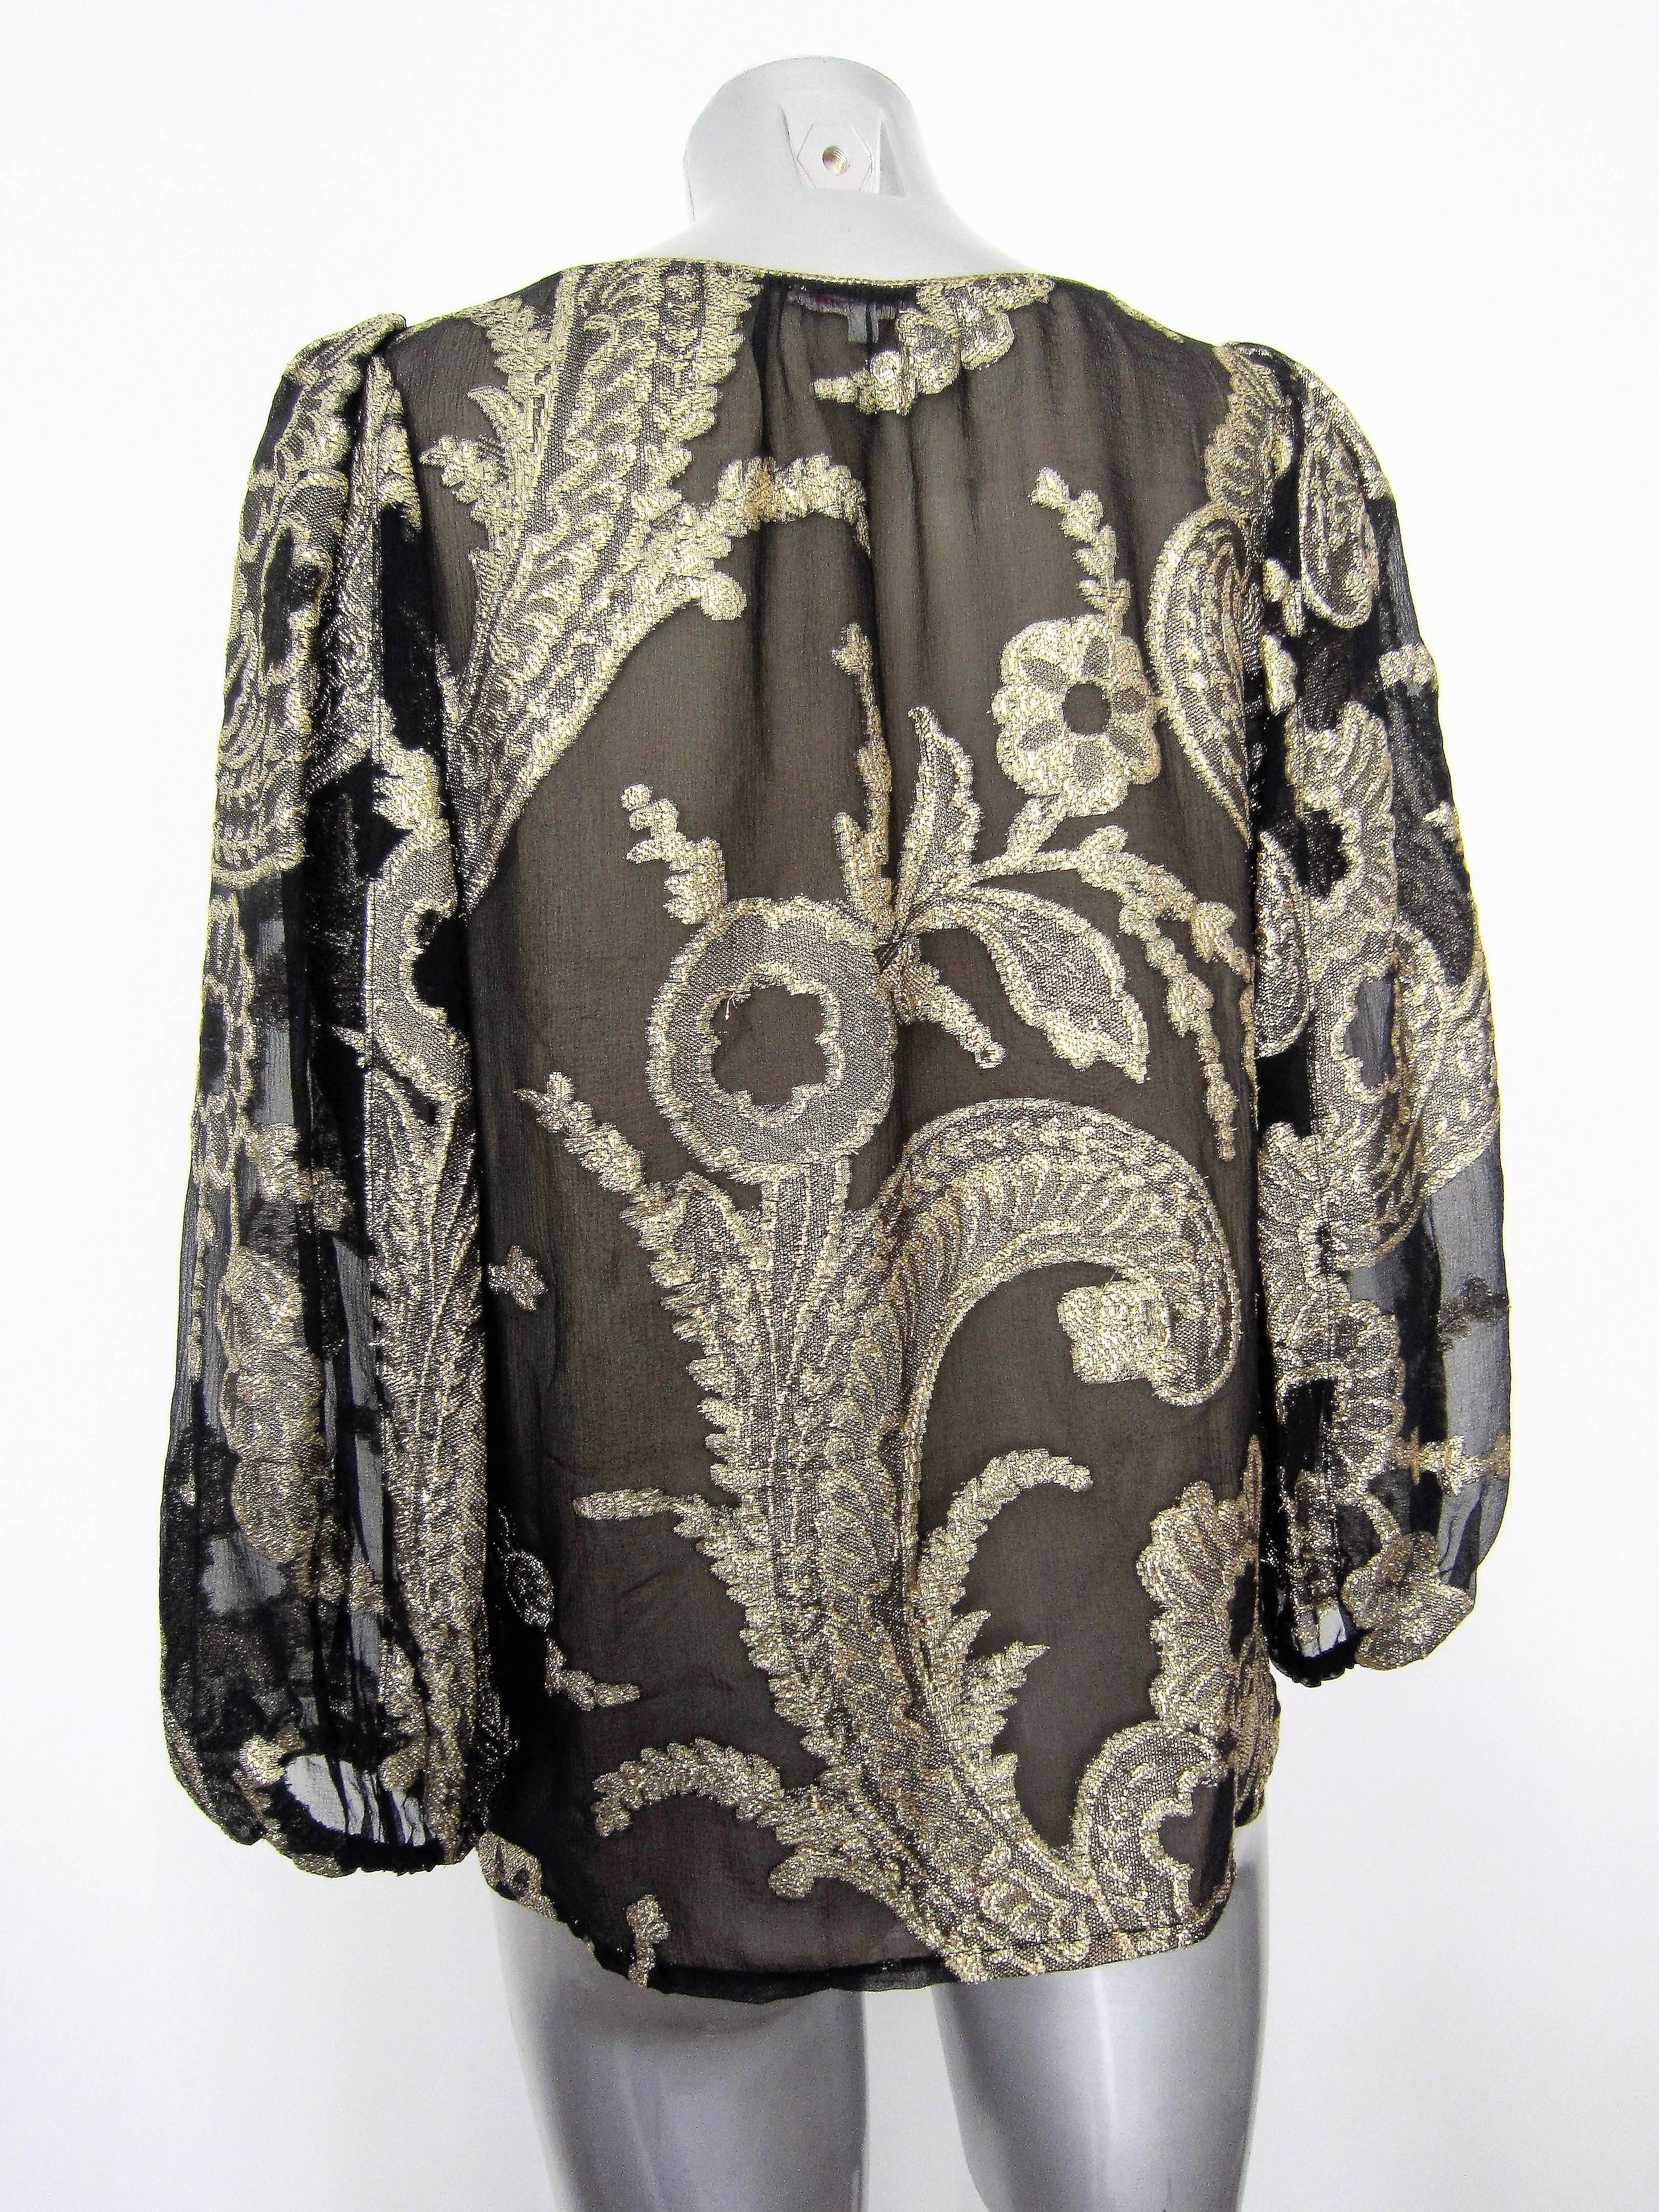 Collectible Yves Saint Laurent black silk muslin blouse with gold flowers lurex patterns, 1976 Russian Collection

Size: 34 fr, 38 it, 6 UK, 2 US But it wear a 40-42 It

Condition: Good Conditions, Some light signs of wear

Approx. Measurements:

-